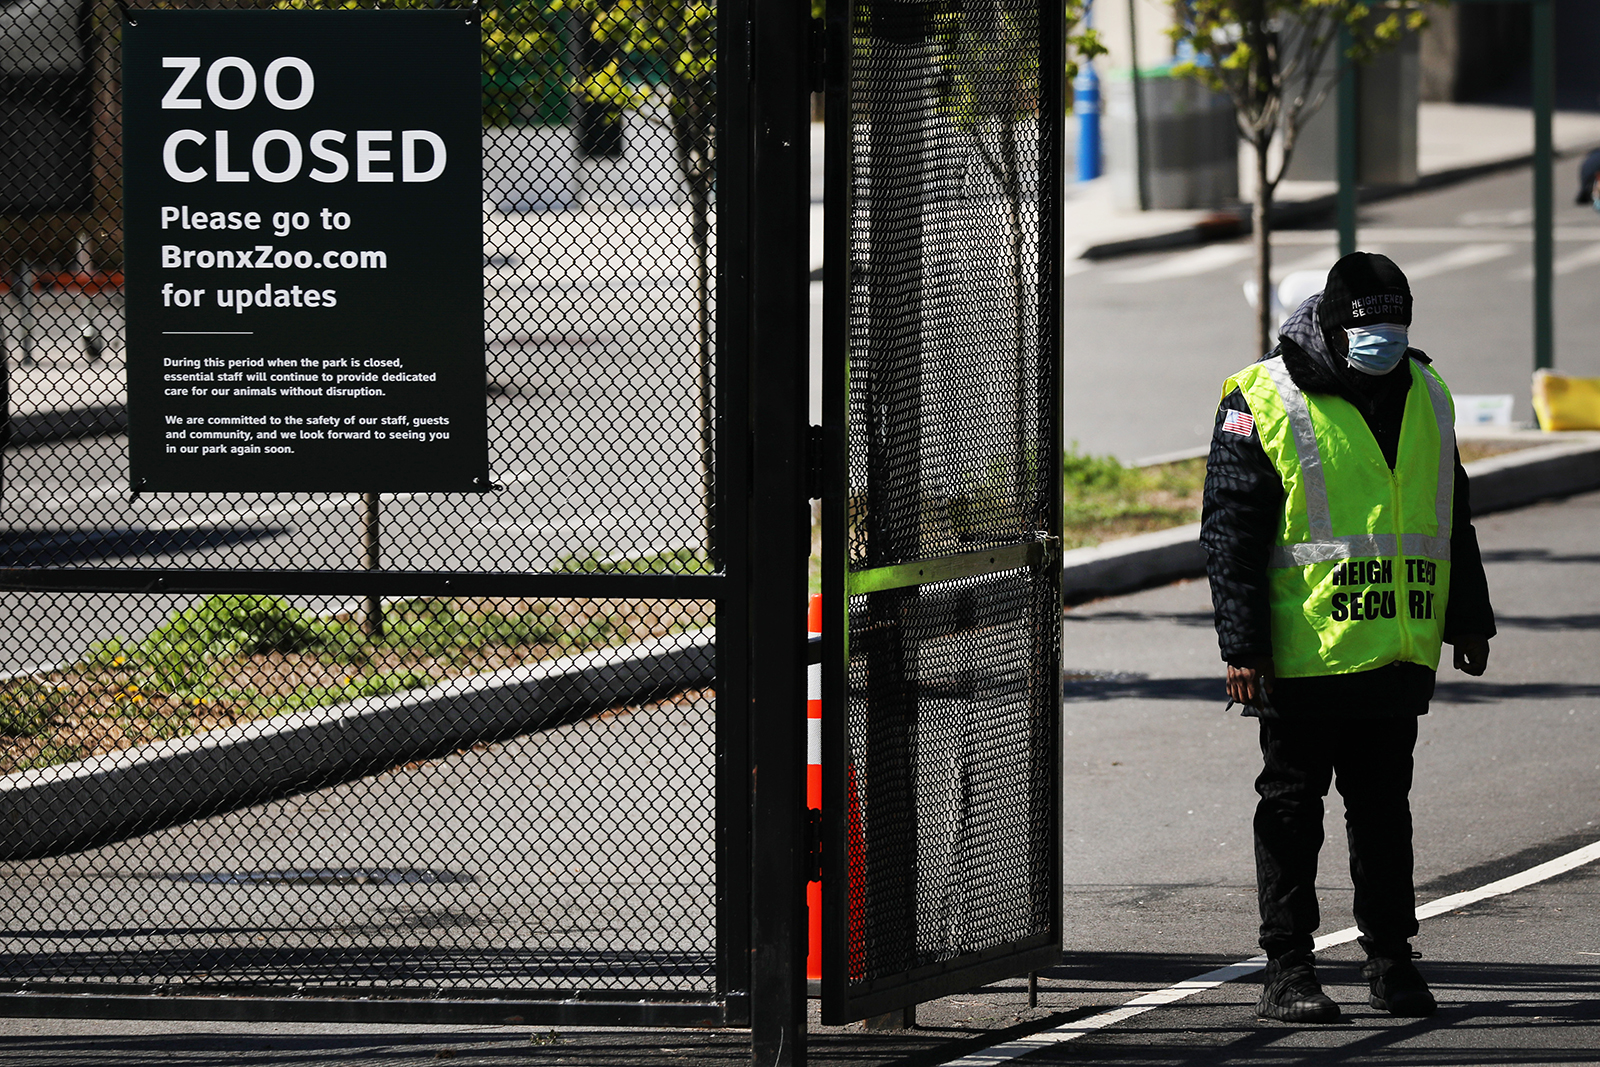 A guard stands at the entrance to the Bronx Zoo on April 6, in New York City.